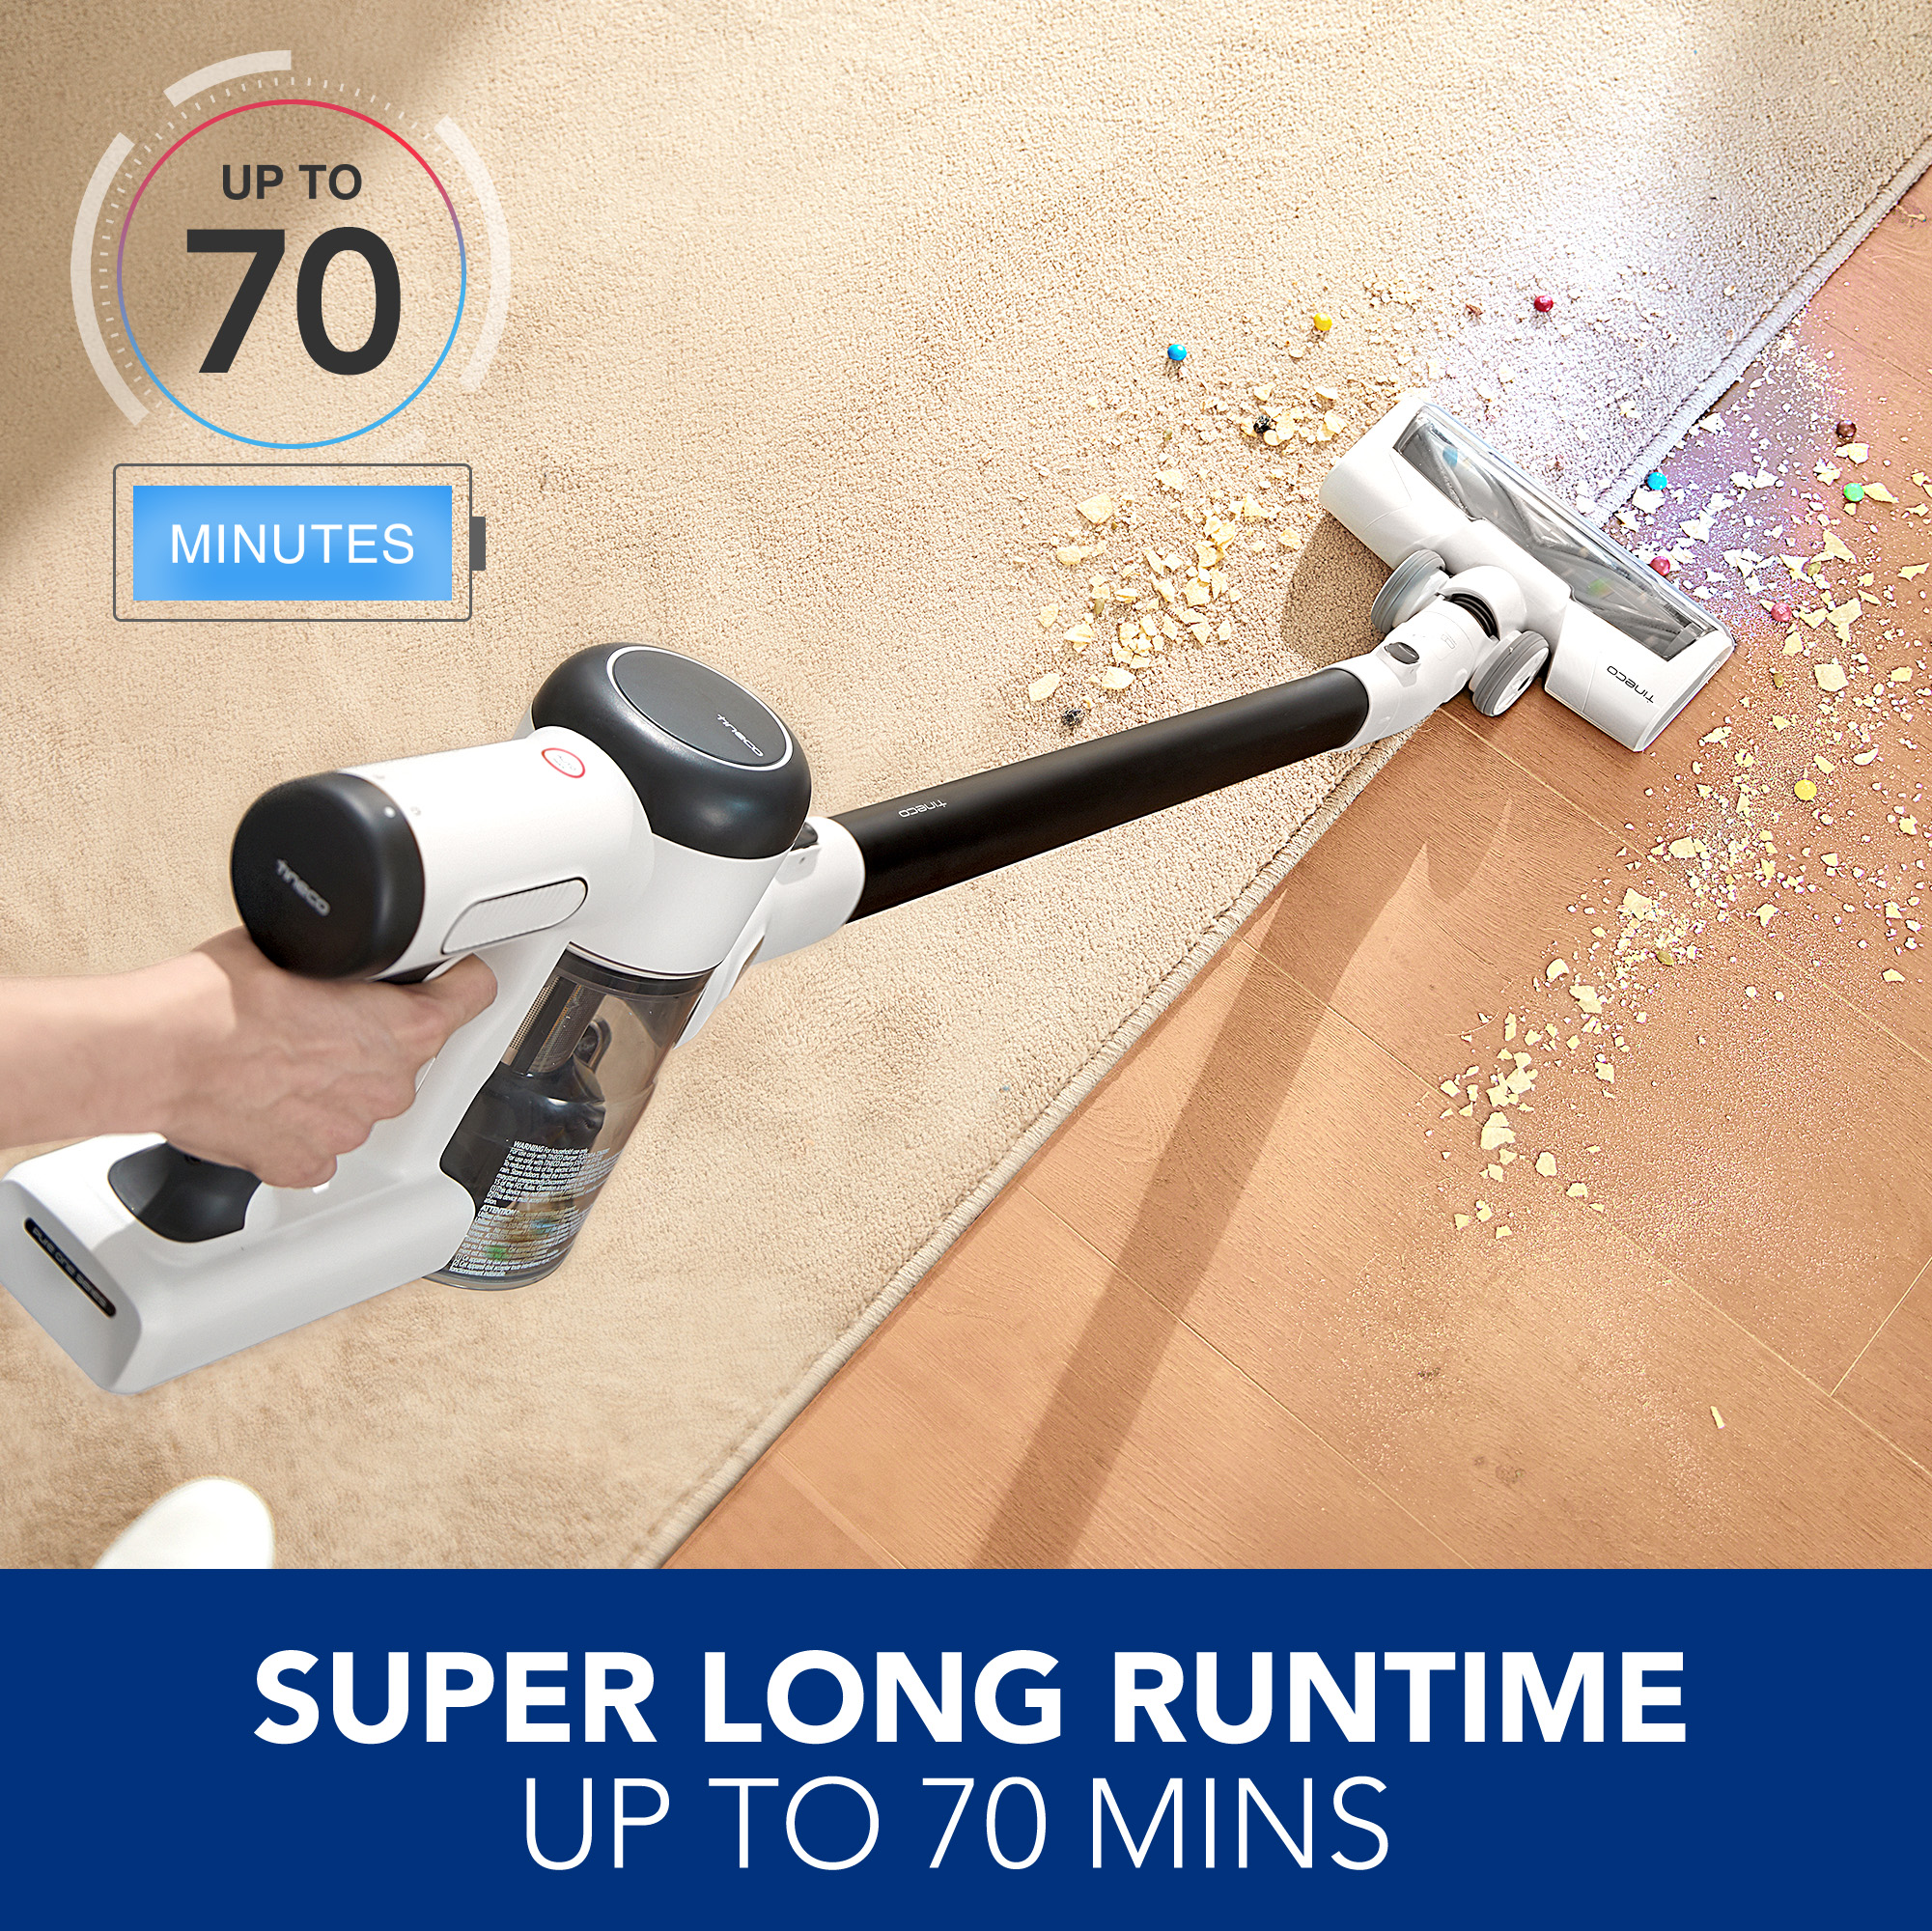 Tineco Pure One X Smart Lightweight Cordless Stick Vacuum Cleaner with Extra-Long Runtime - image 3 of 10